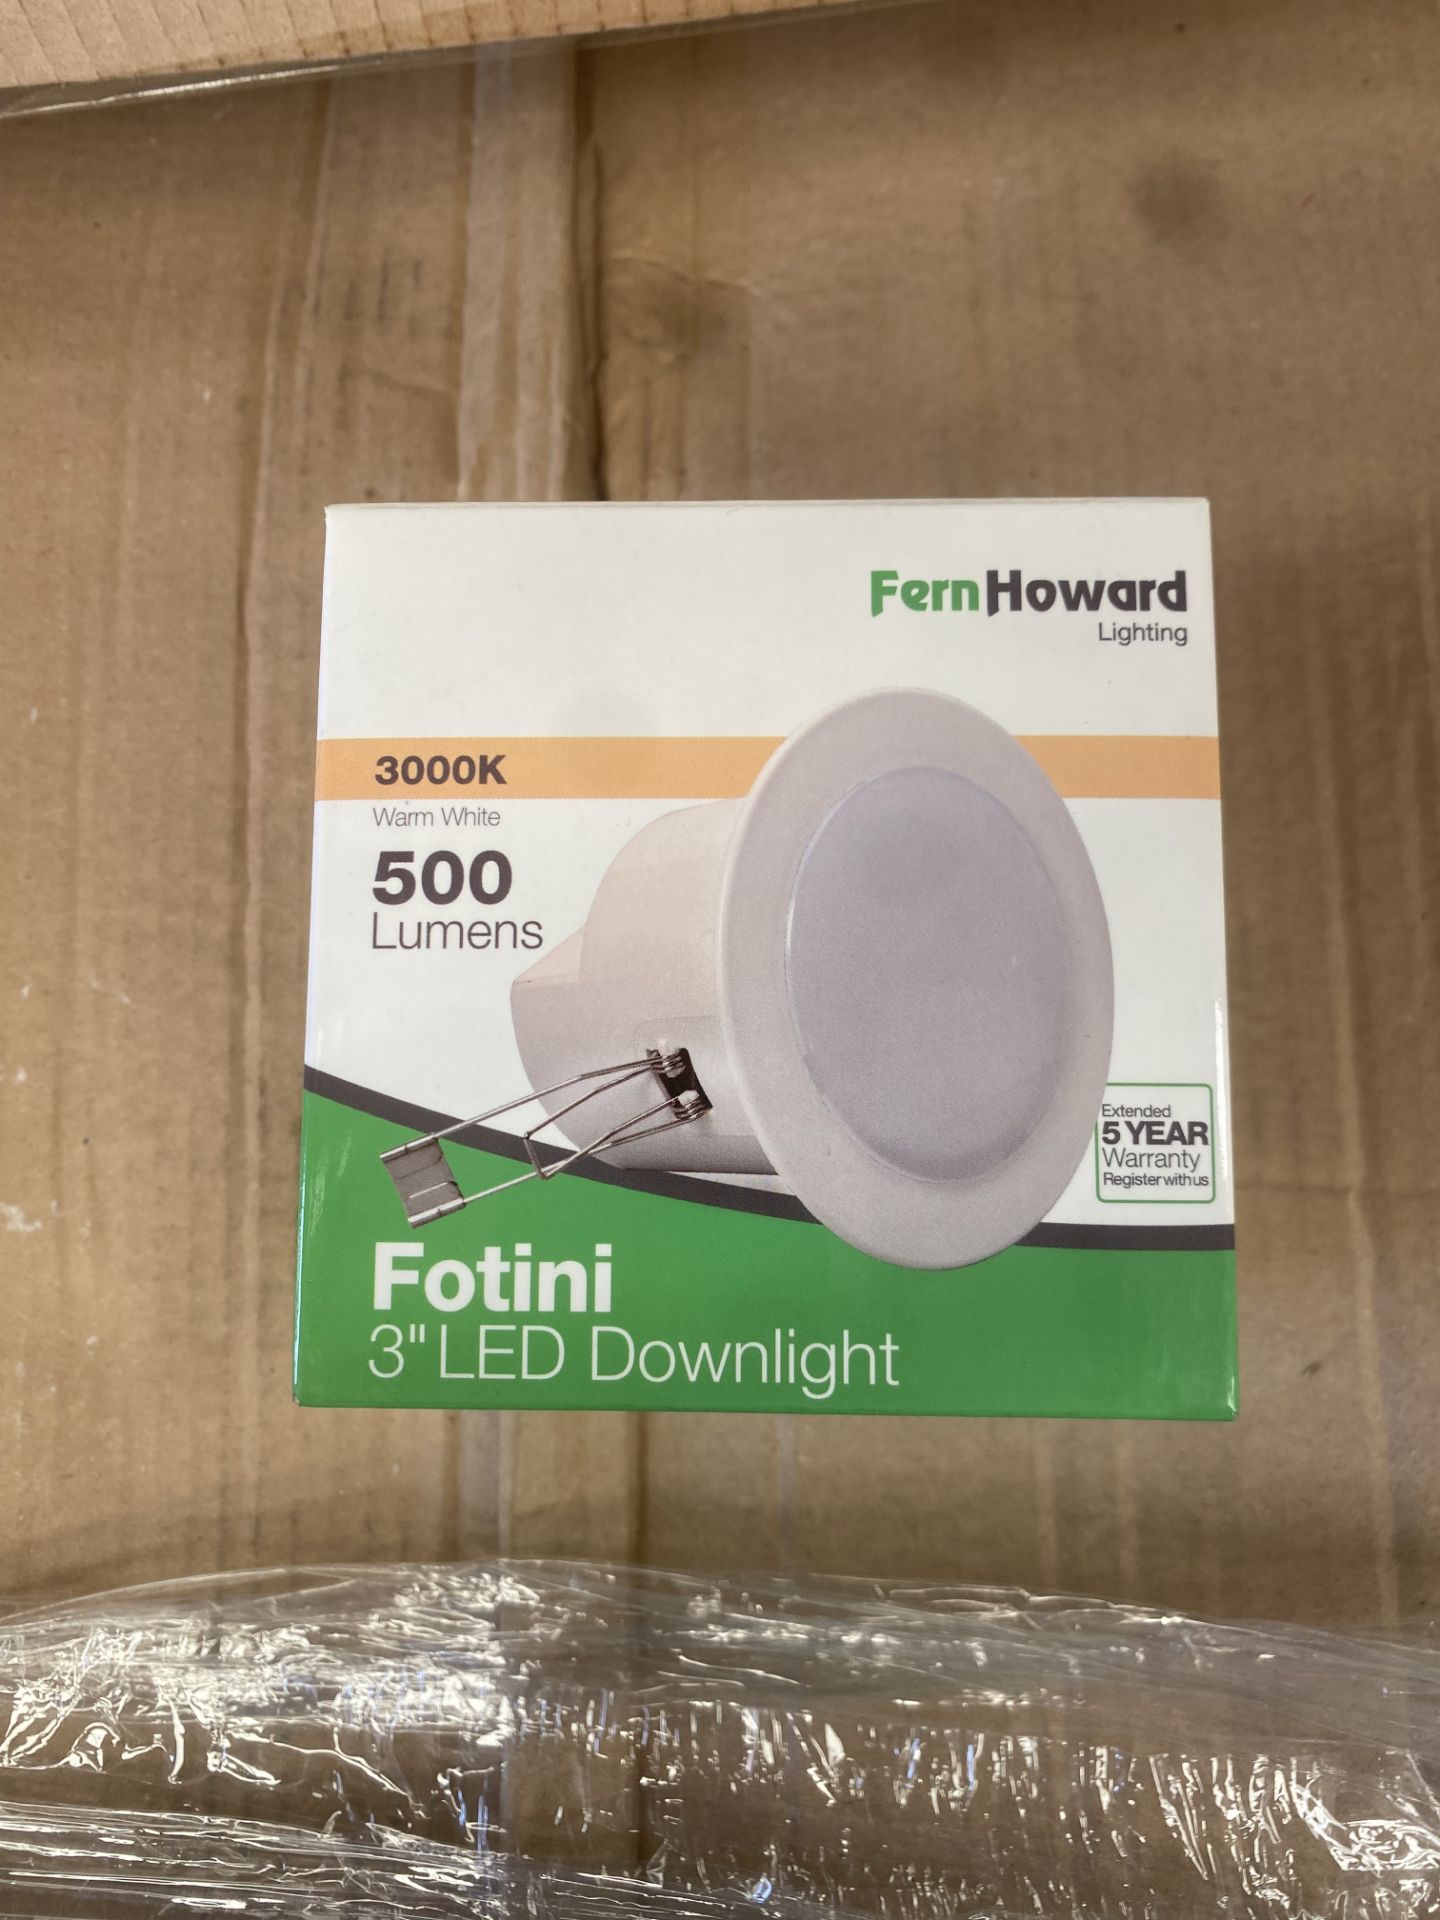 480 X 3 INCH LED DOWNLIGHT 3000K TRADE VALUE £5050 - Image 2 of 4